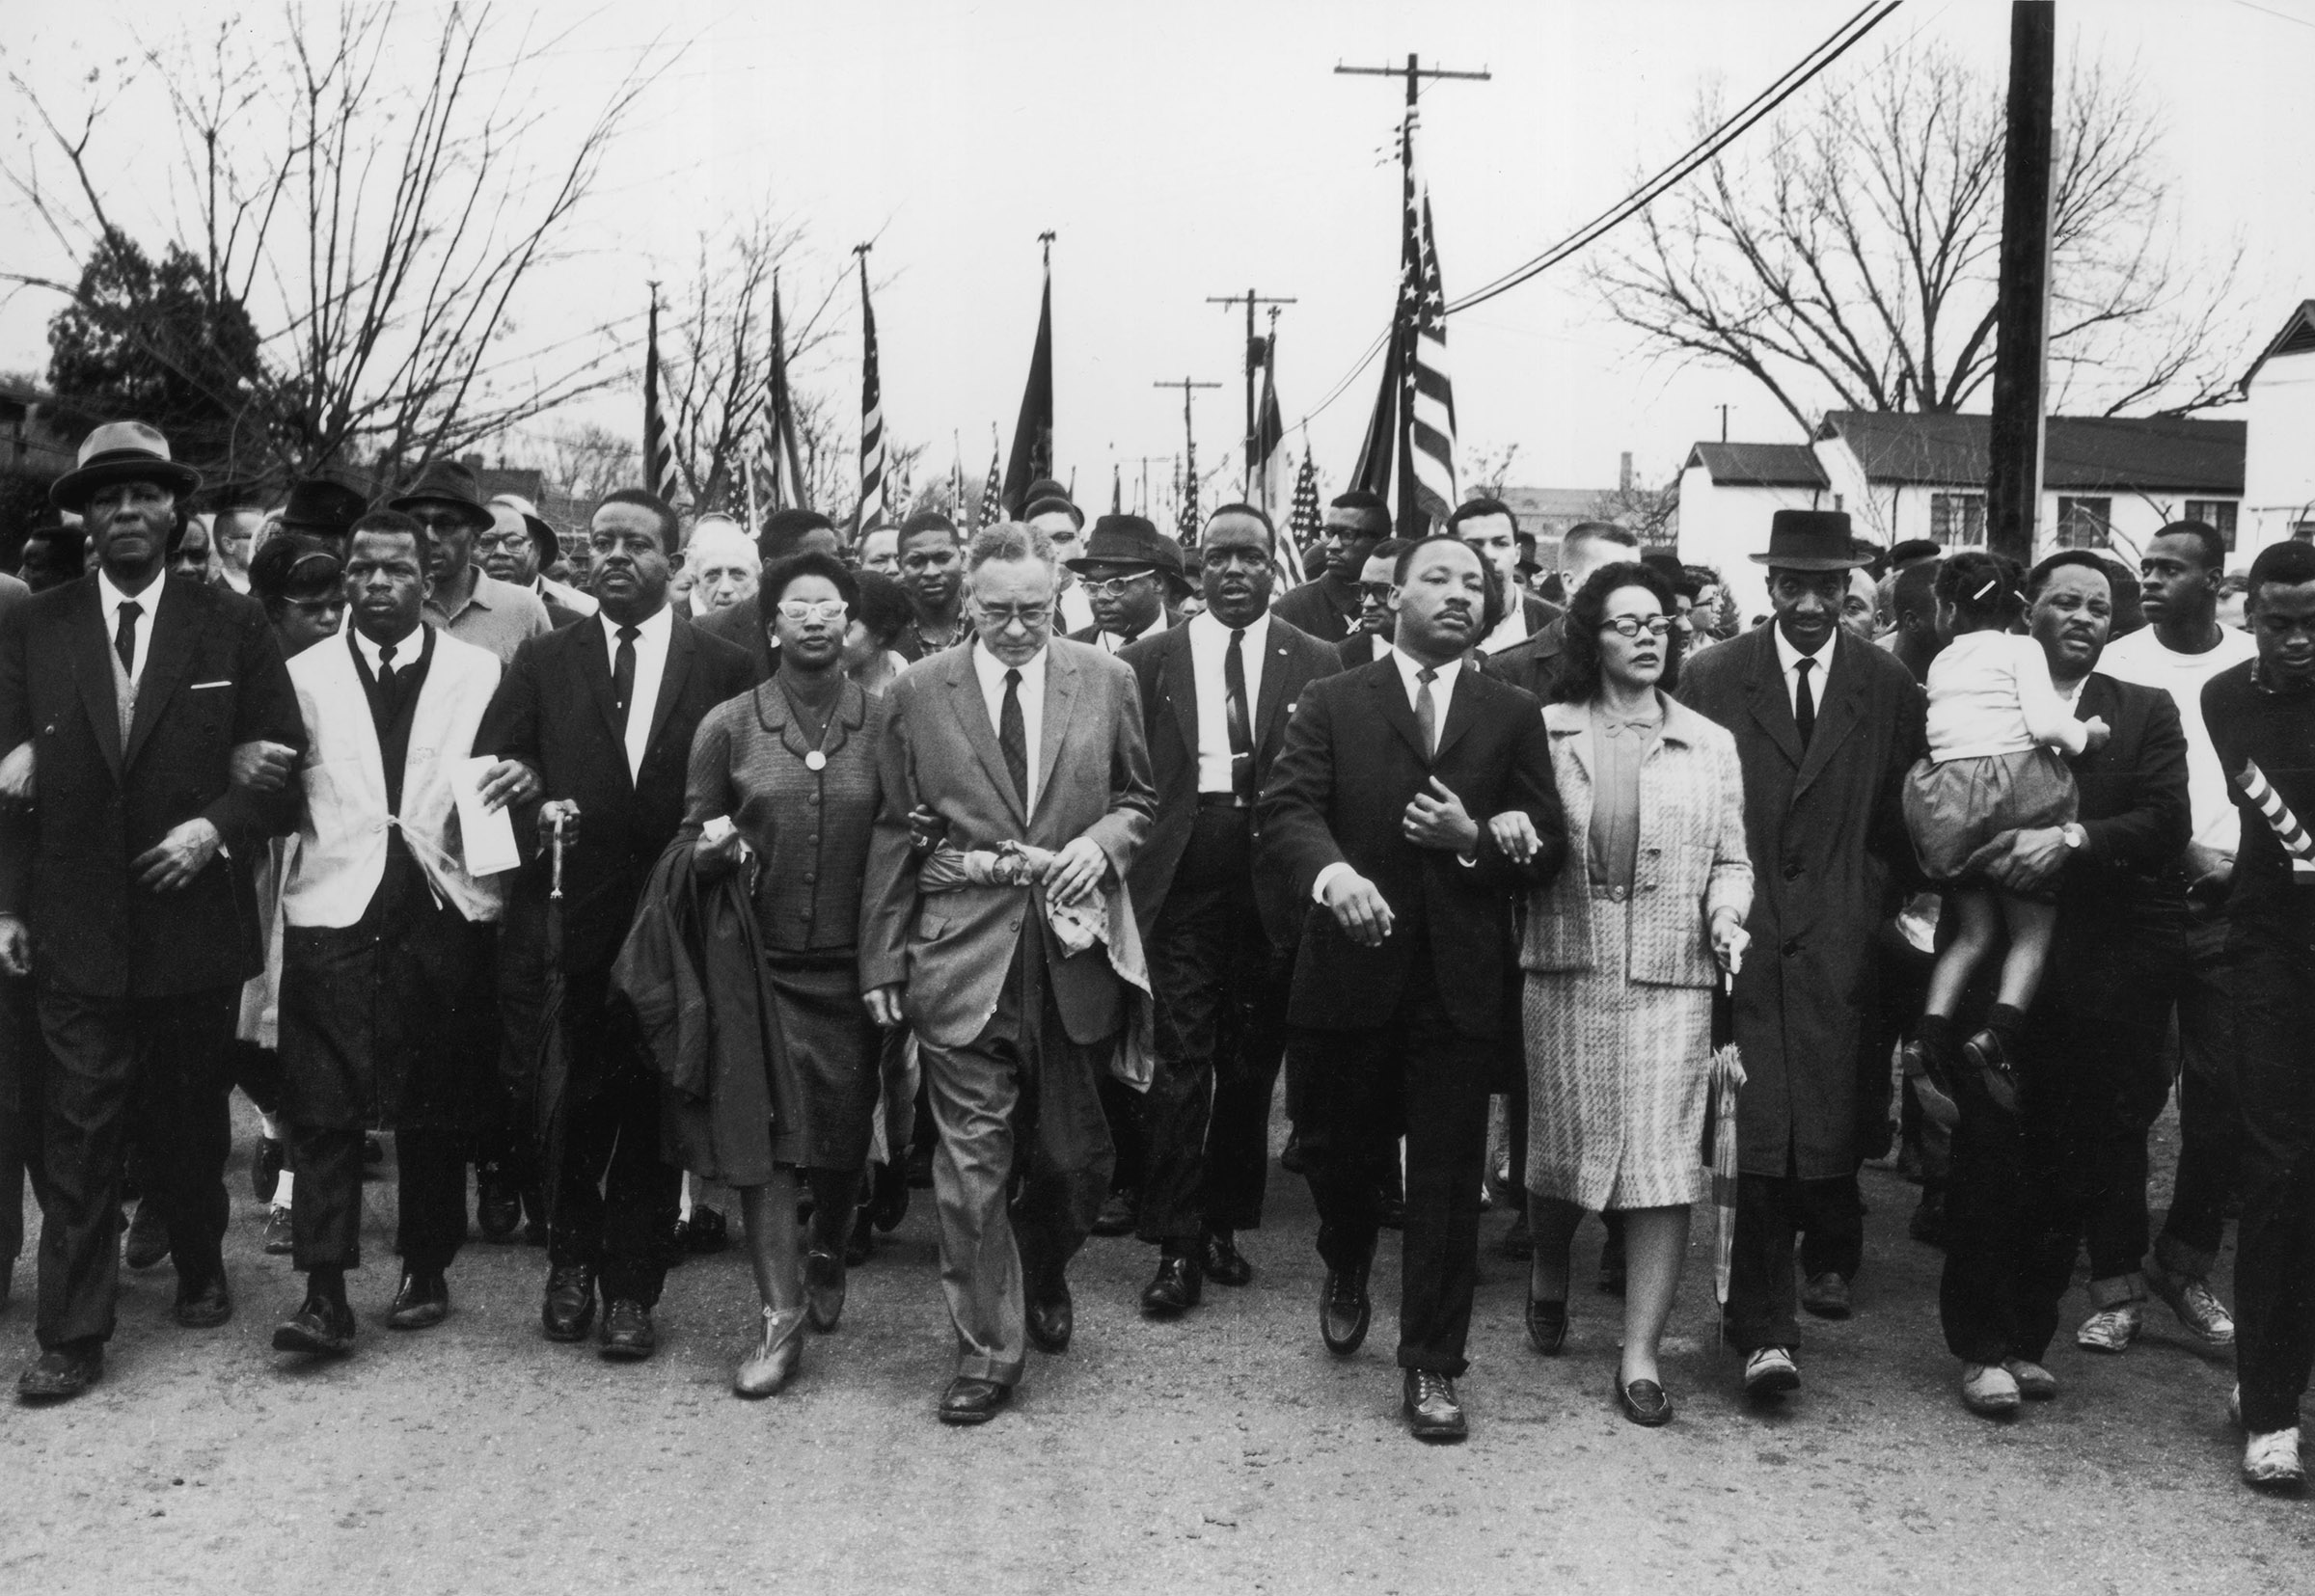 John Lewis (second from left) joins American civil-rights campaigner Martin Luther King Jr. and his wife Coretta Scott King in a march from Selma, Ala., to the state capital in Montgomery on March 30, 1965.